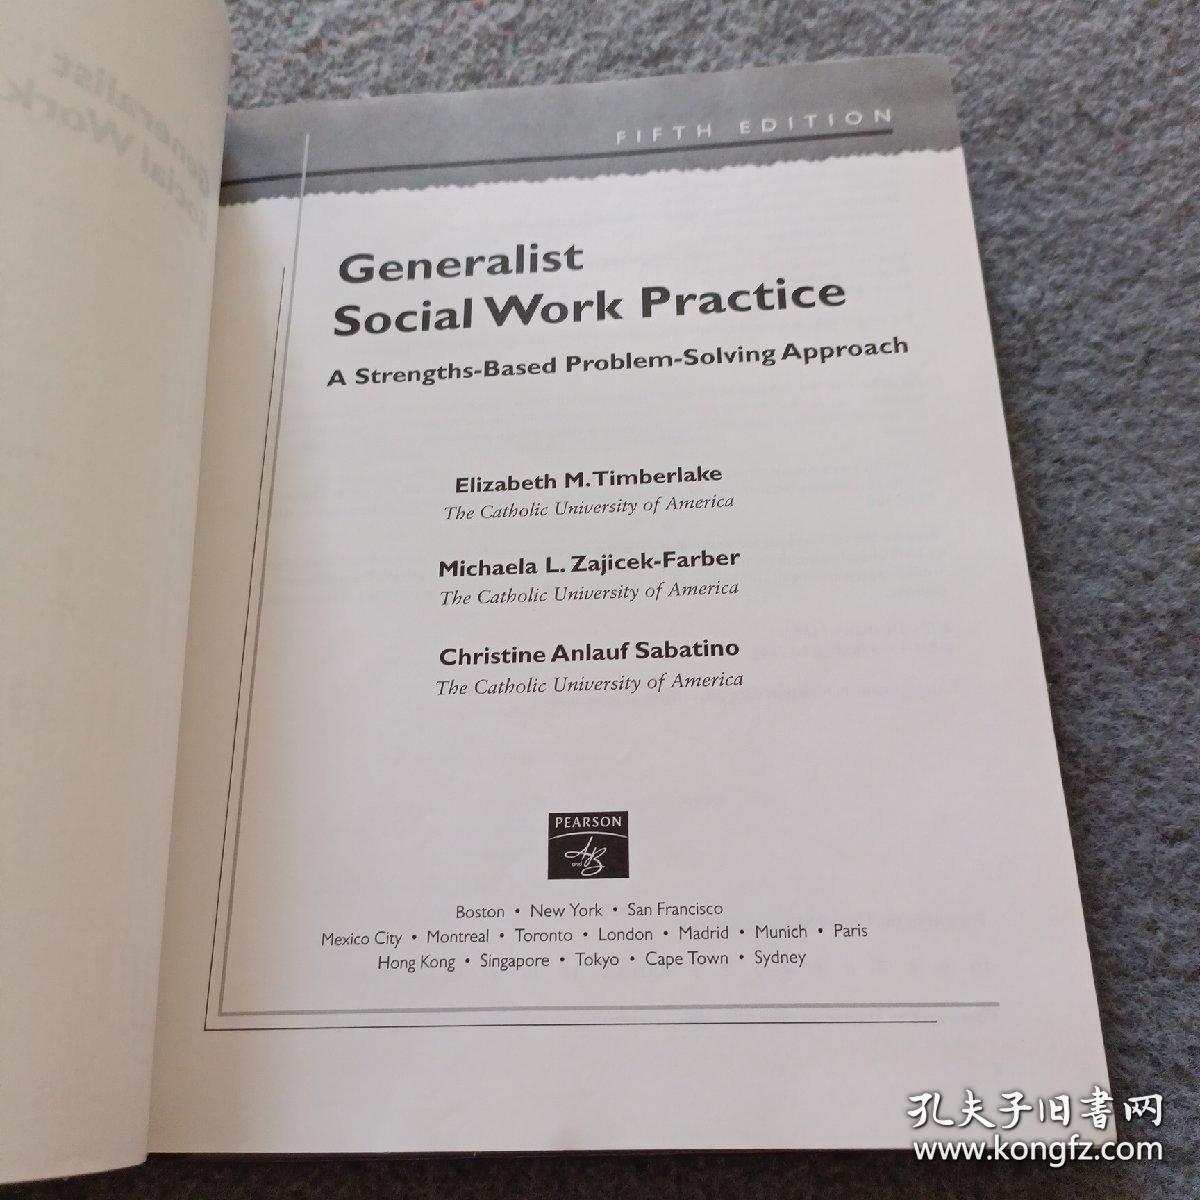 Generalist Social Work Practice A Strengths-Based Problem-Solving Approach FIFTH EDITION